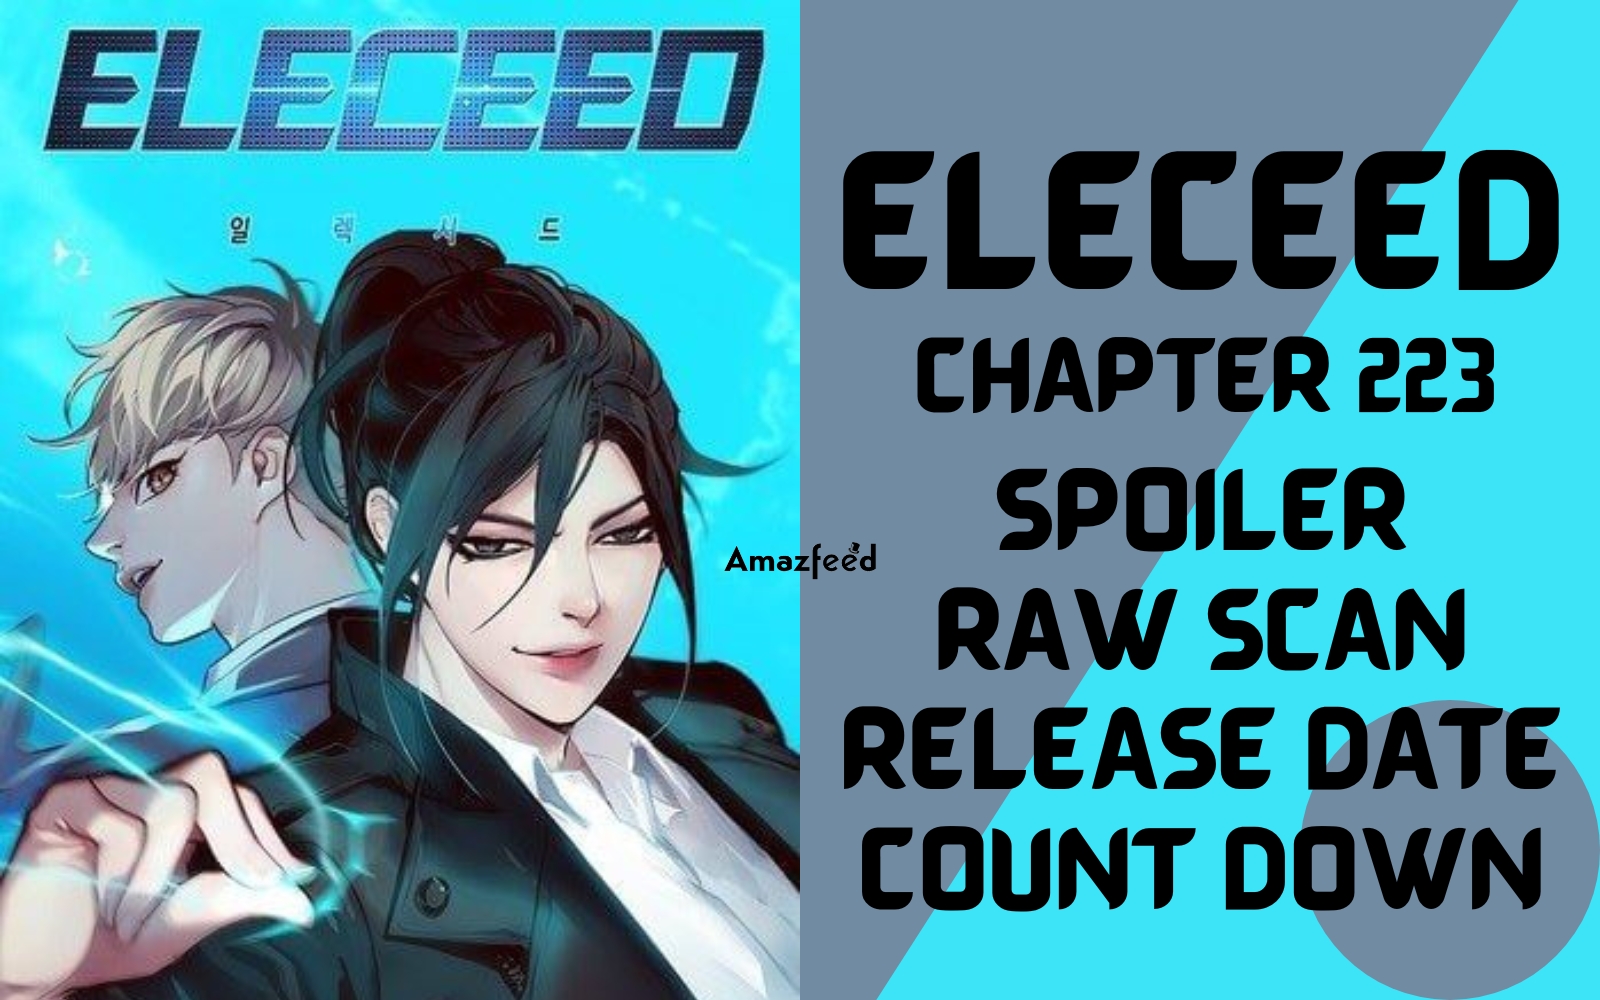 Eleceed Chapter 223 Spoilers, Raw Scan, Color Page, Release Date & Everything You Want to Know